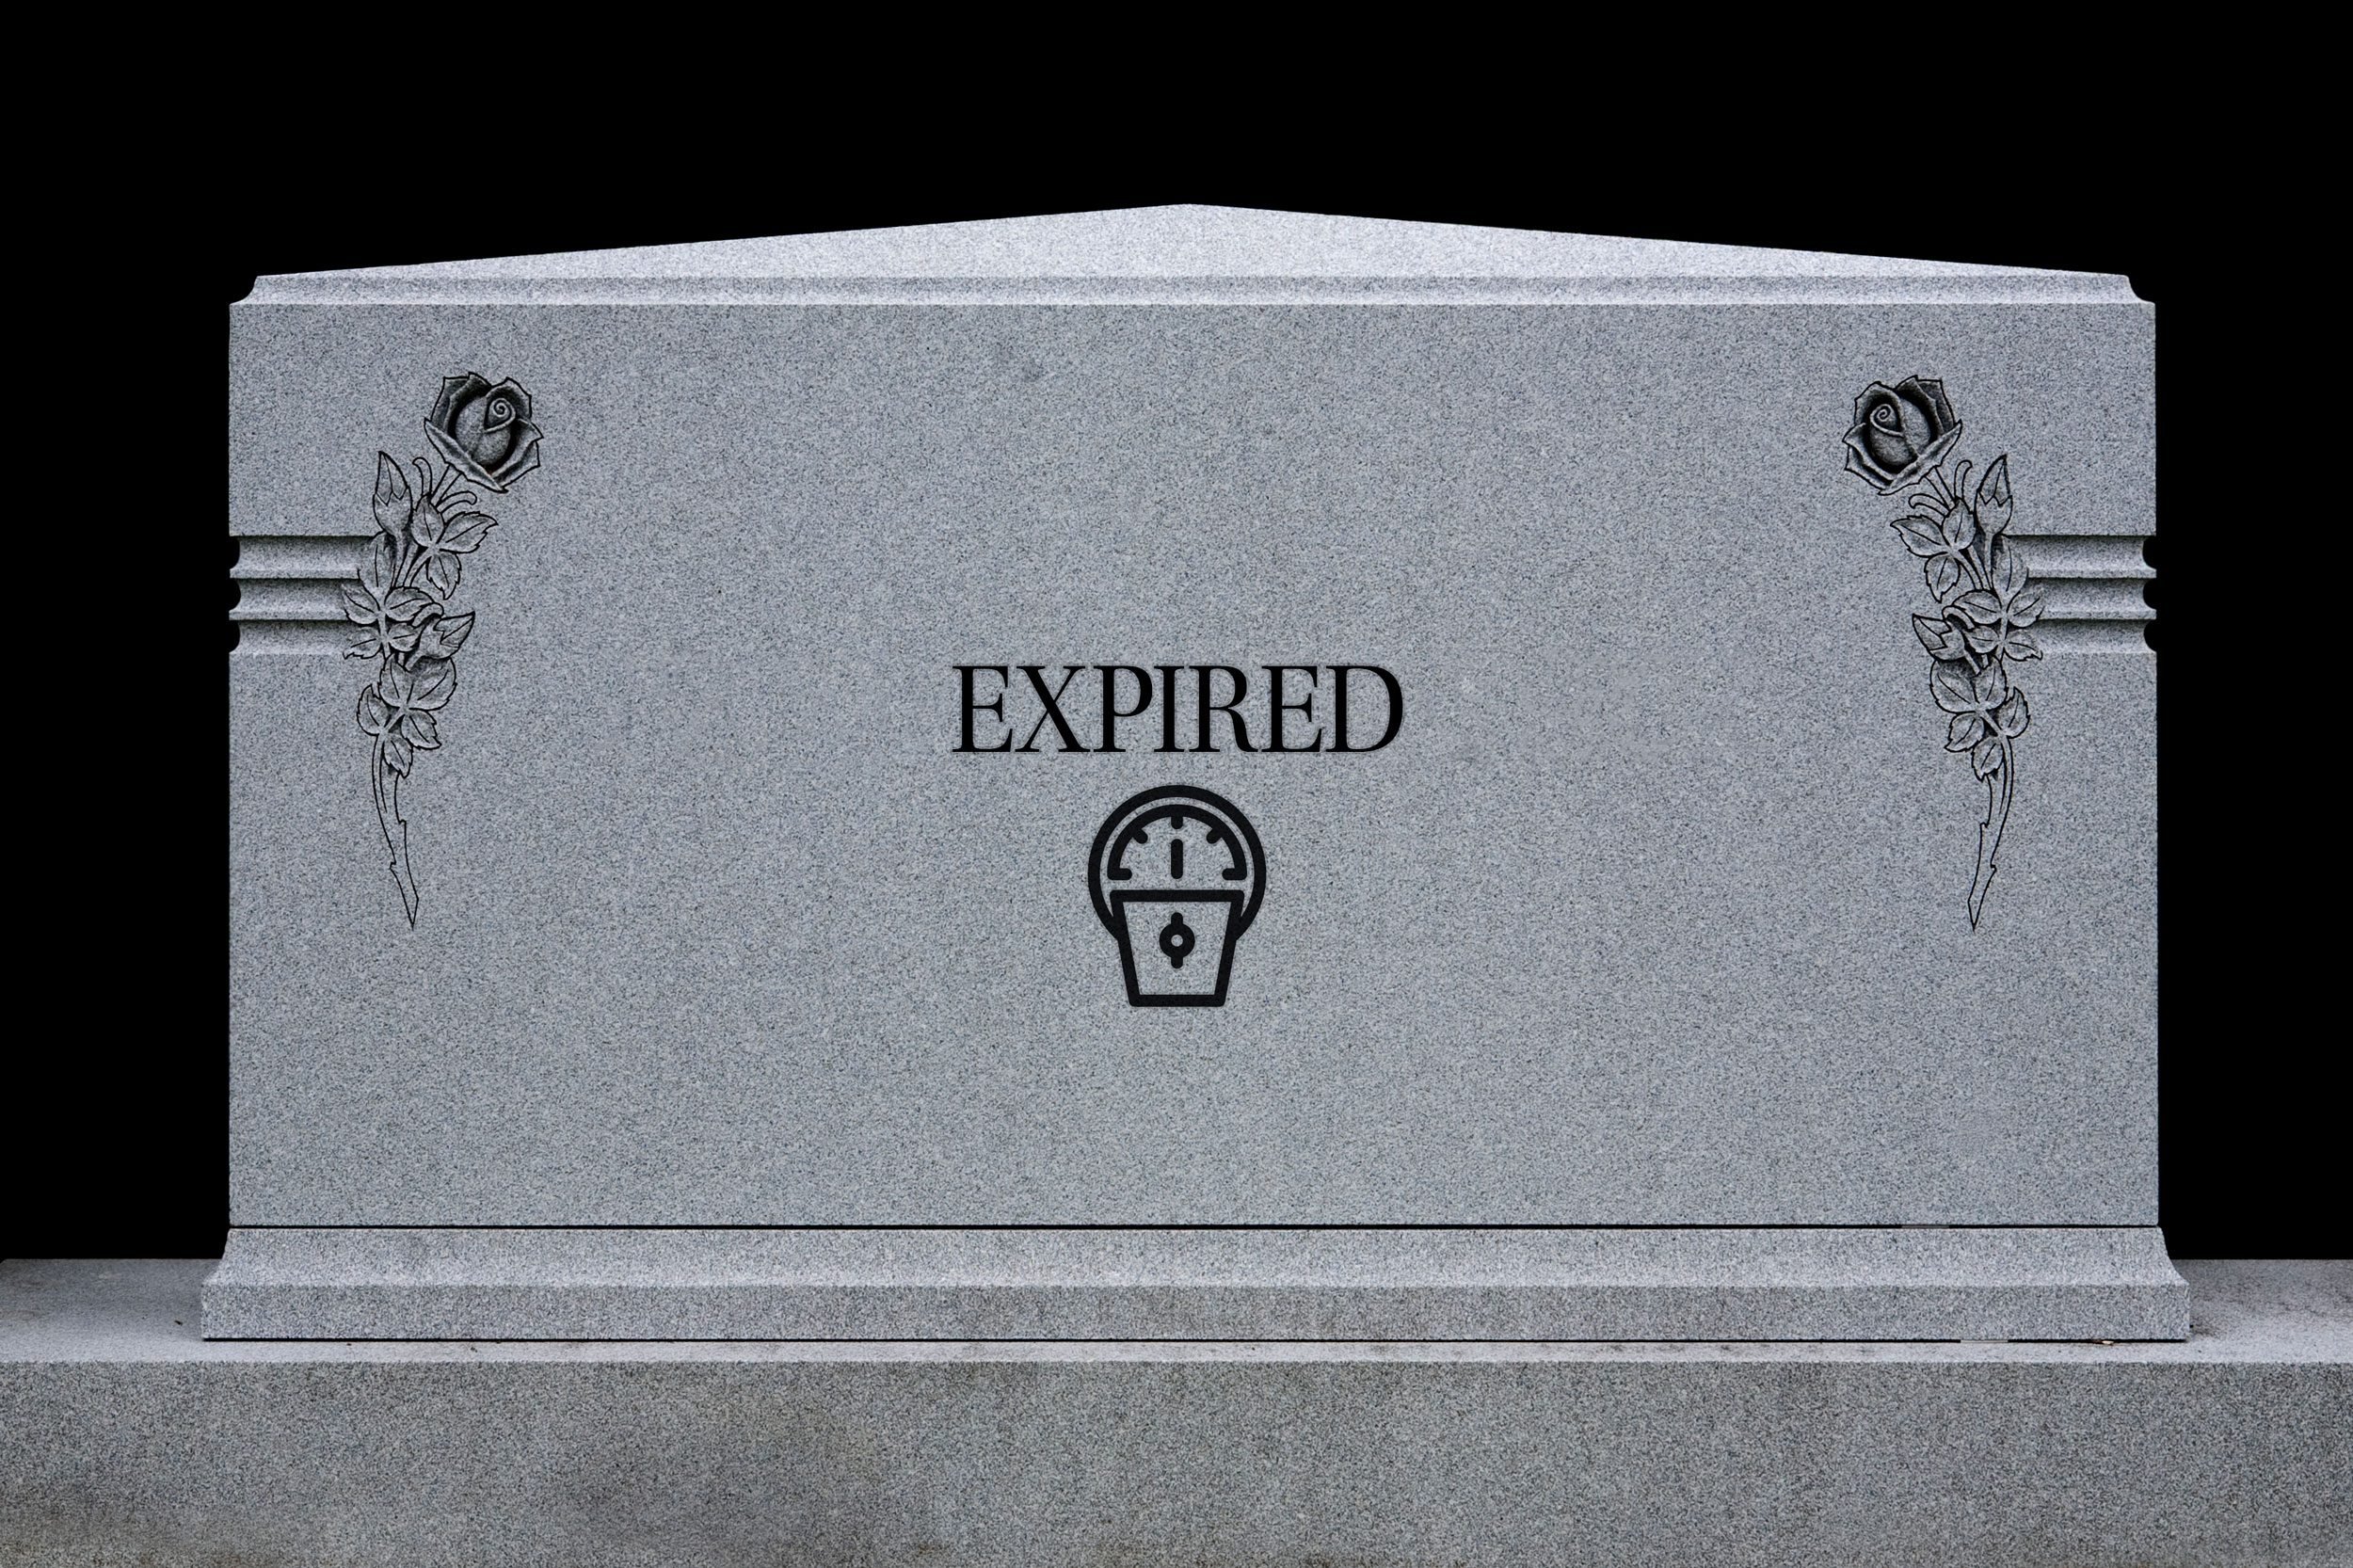 tombstone: "Expired" with parking meter icon